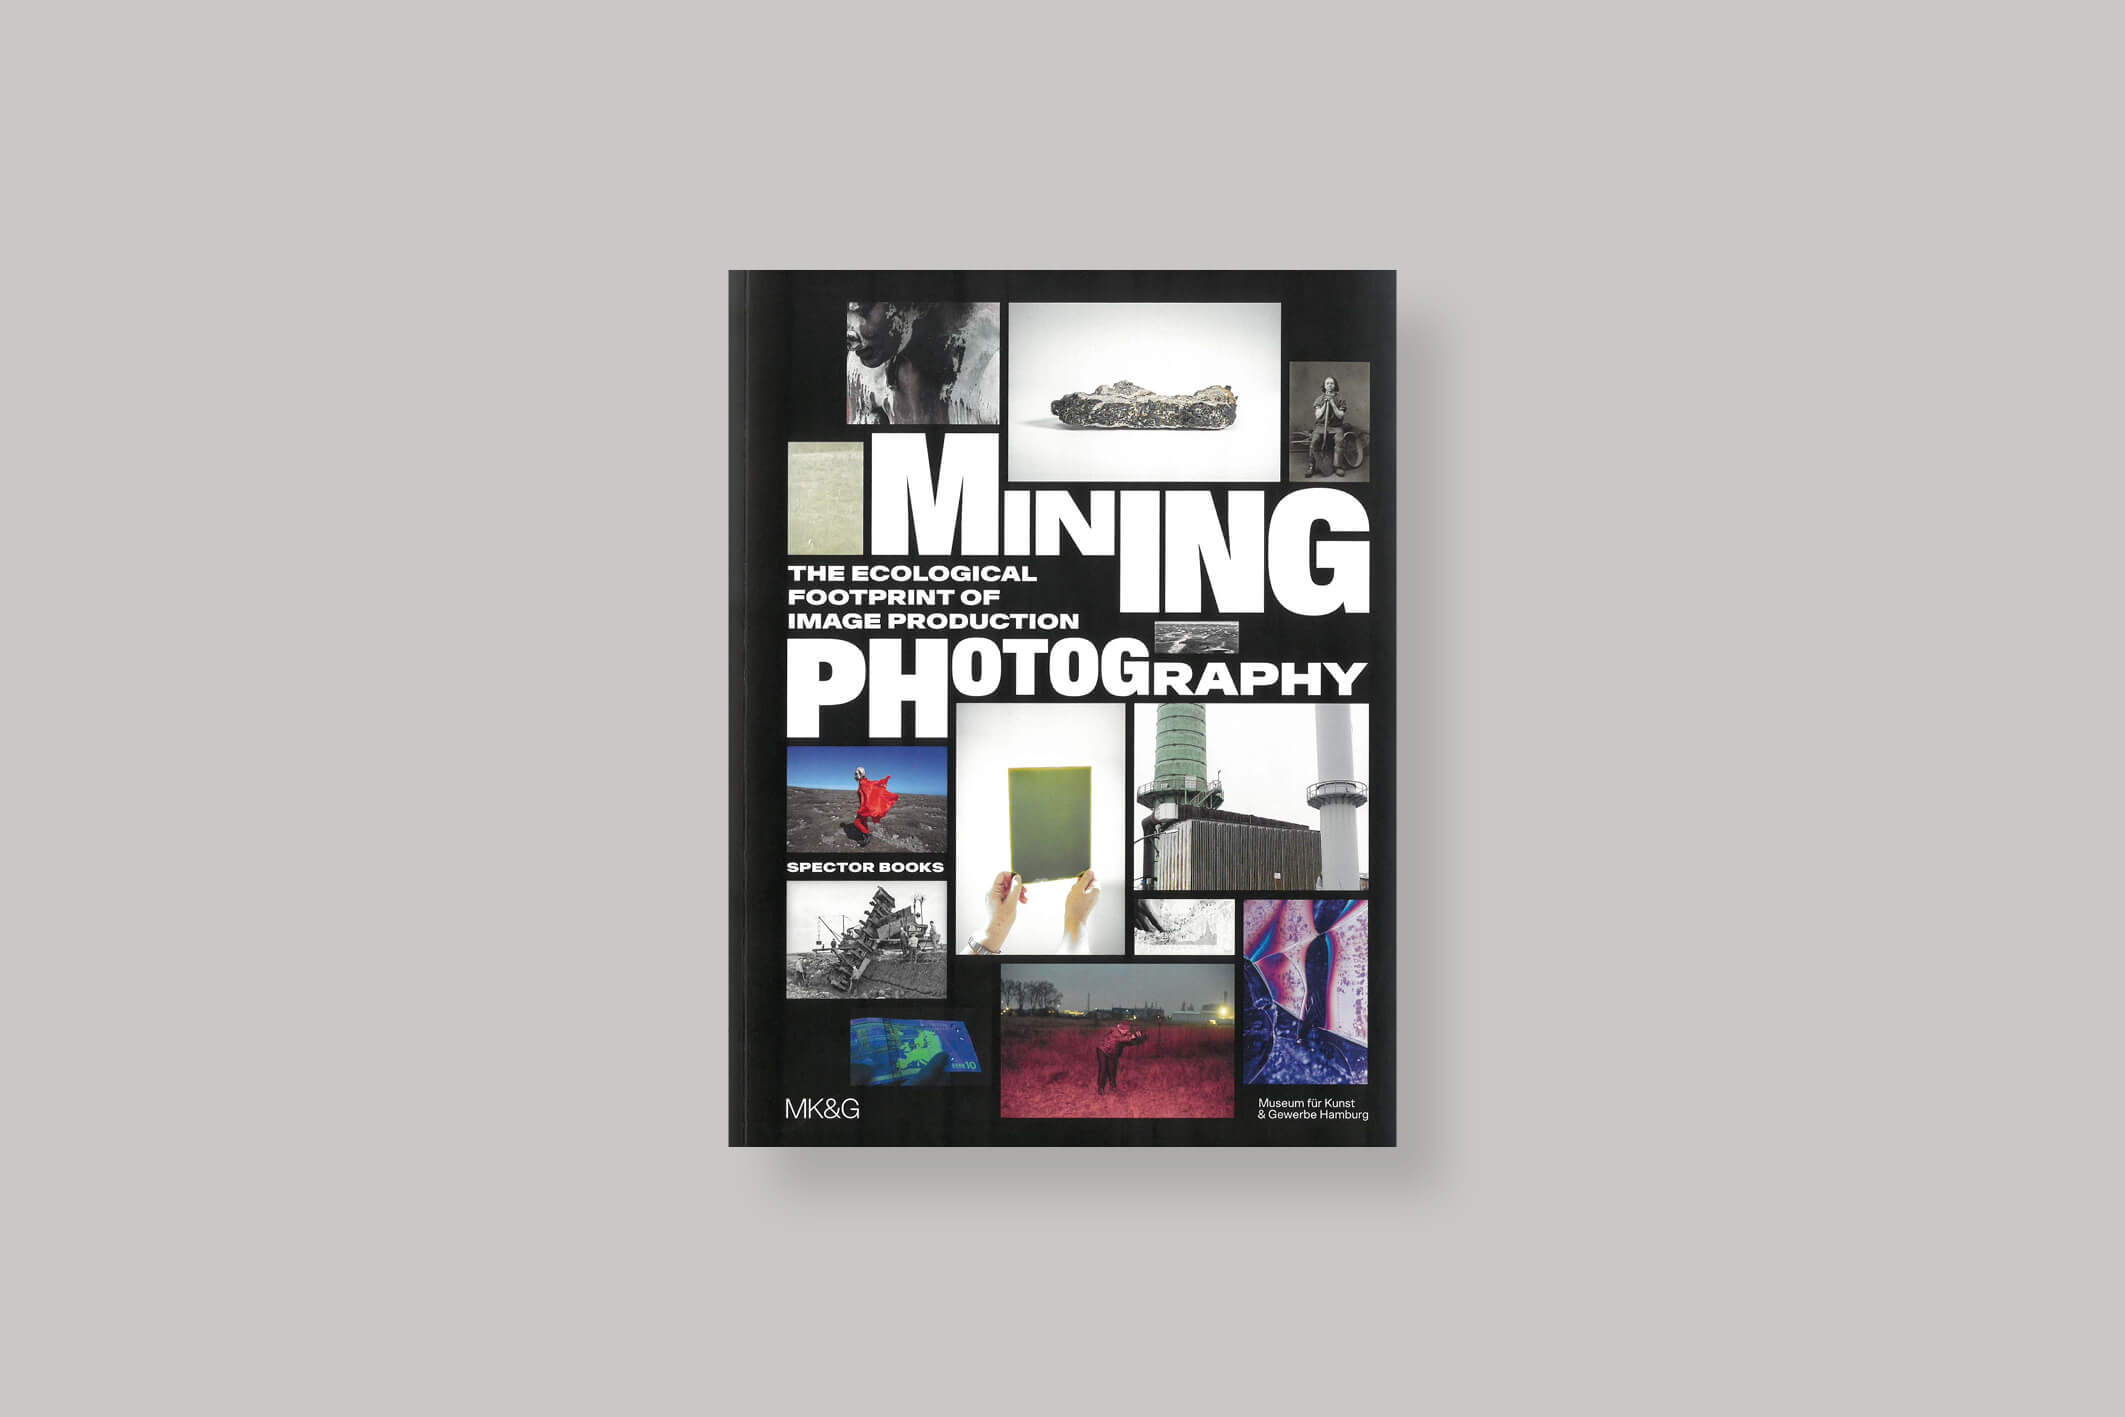 mining-photography-spector-books-cover